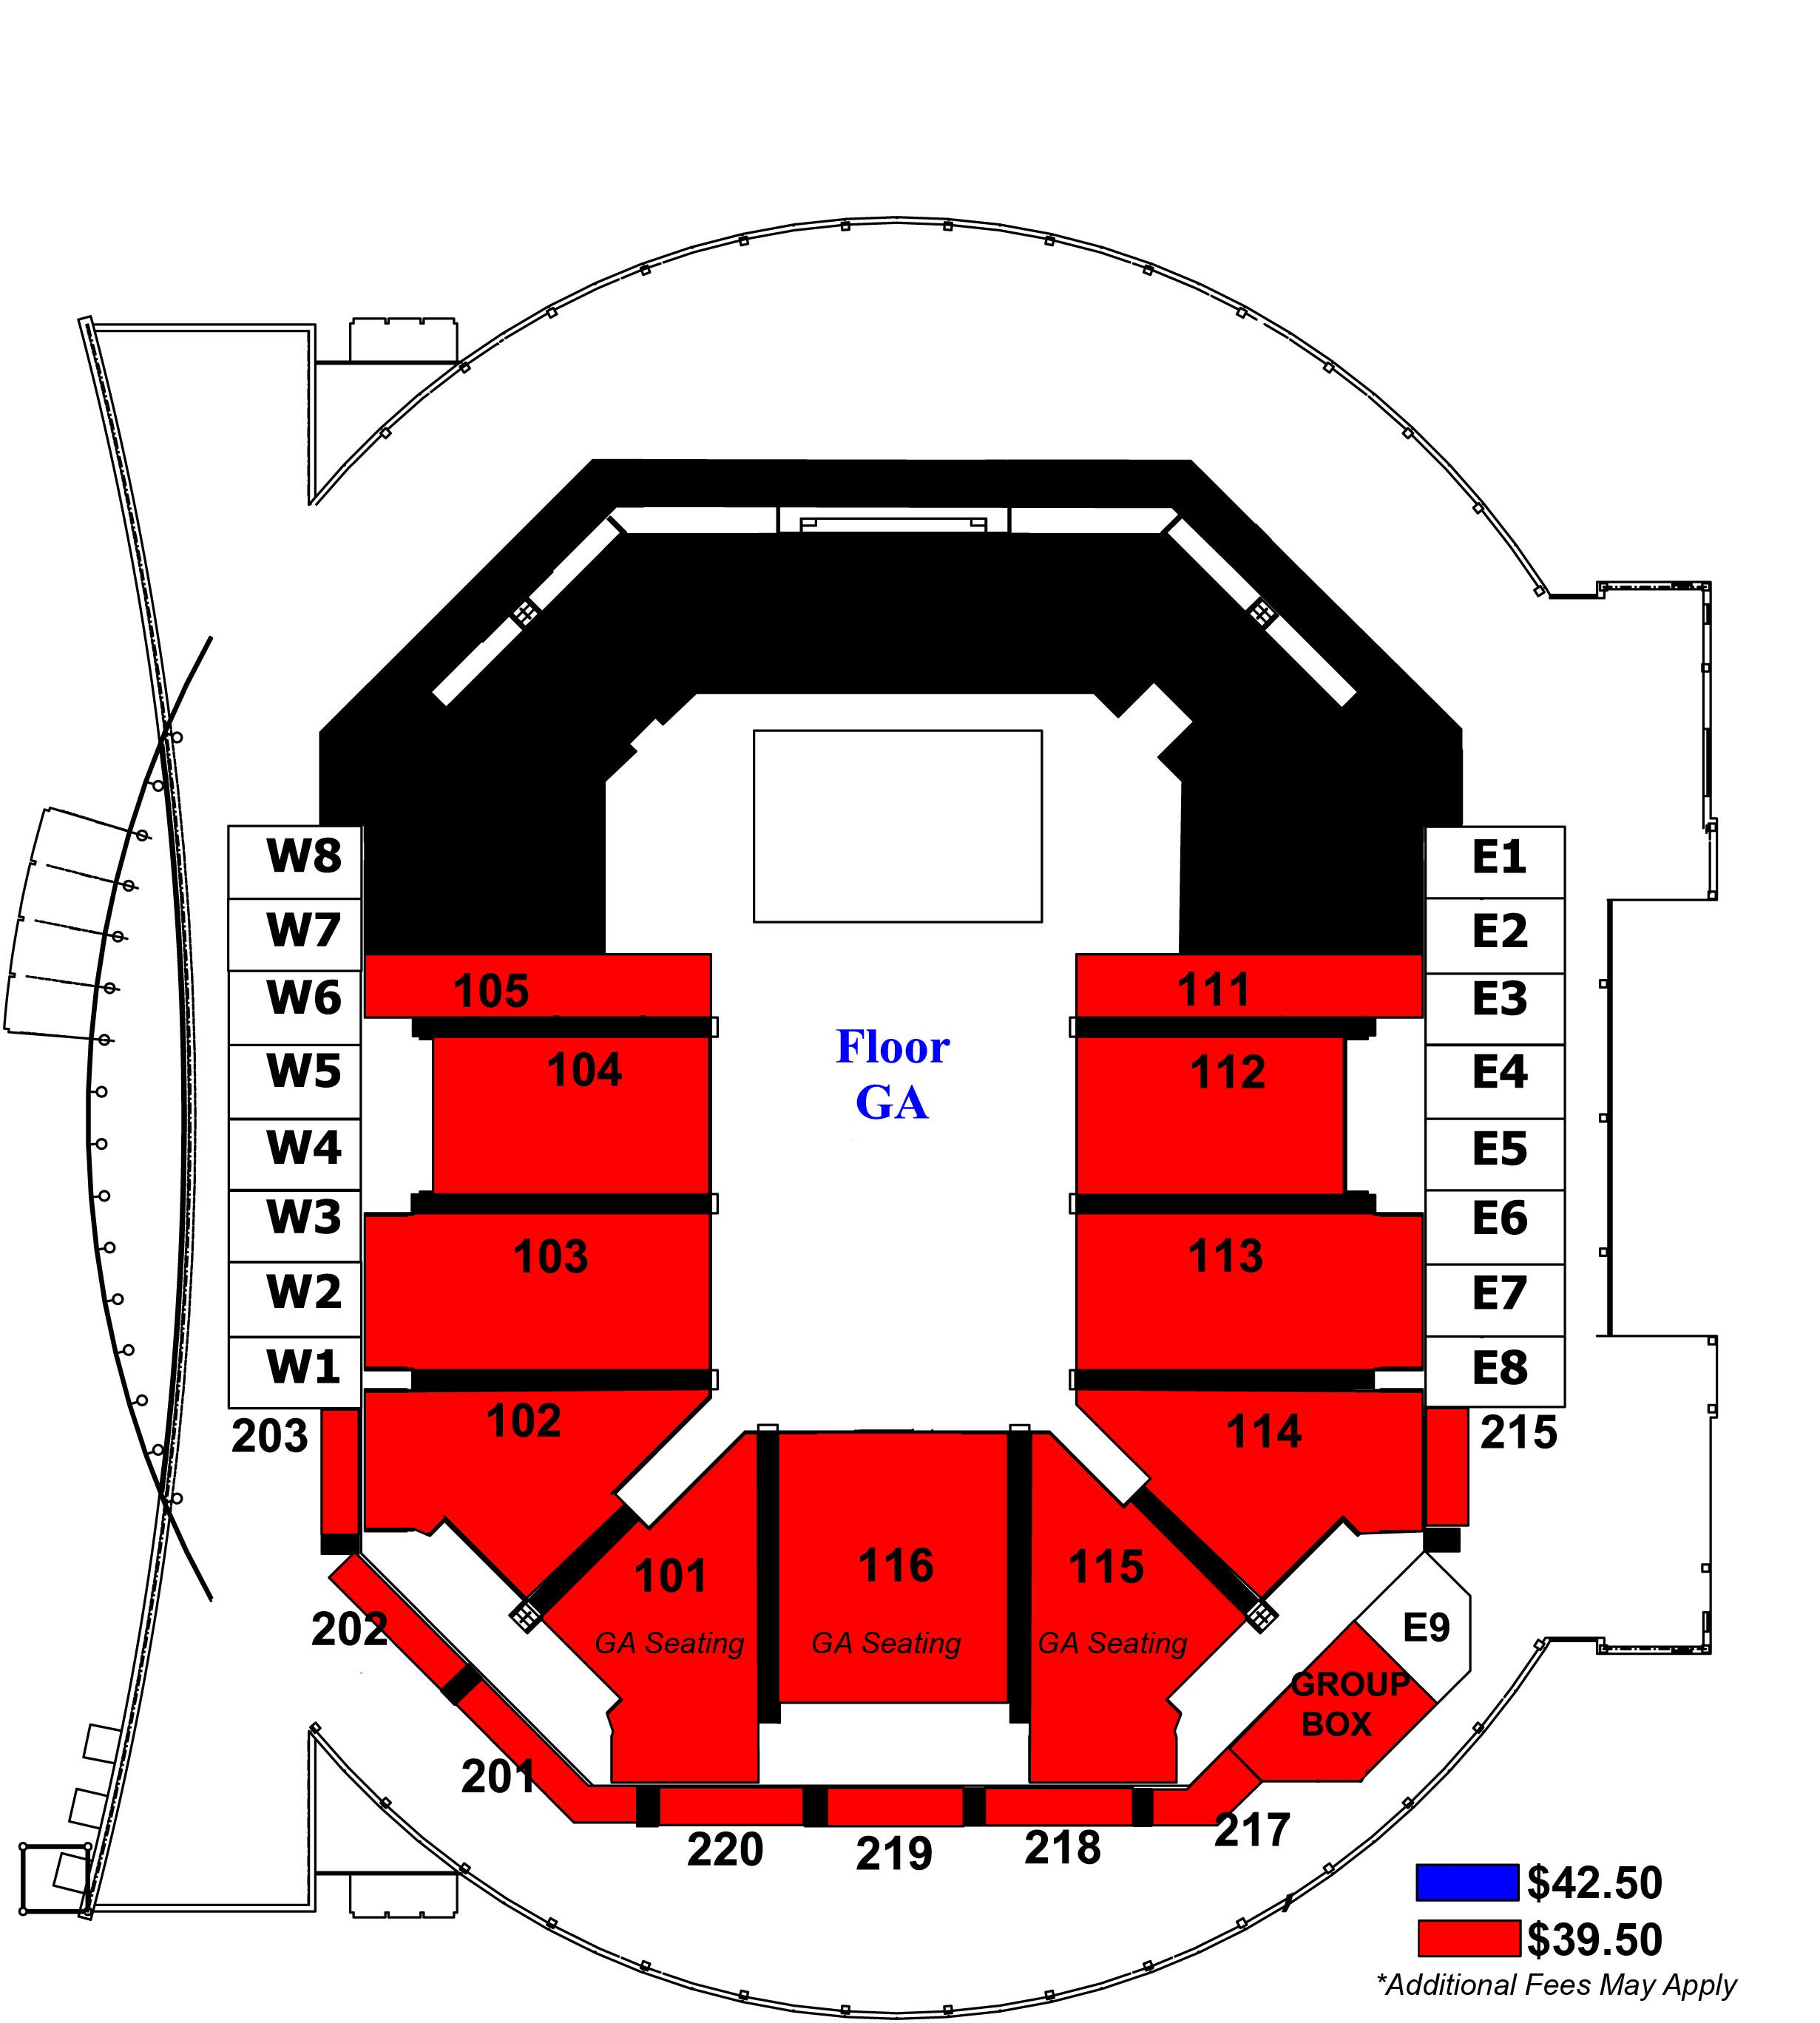 Seating Options Opinion : r/Paramore